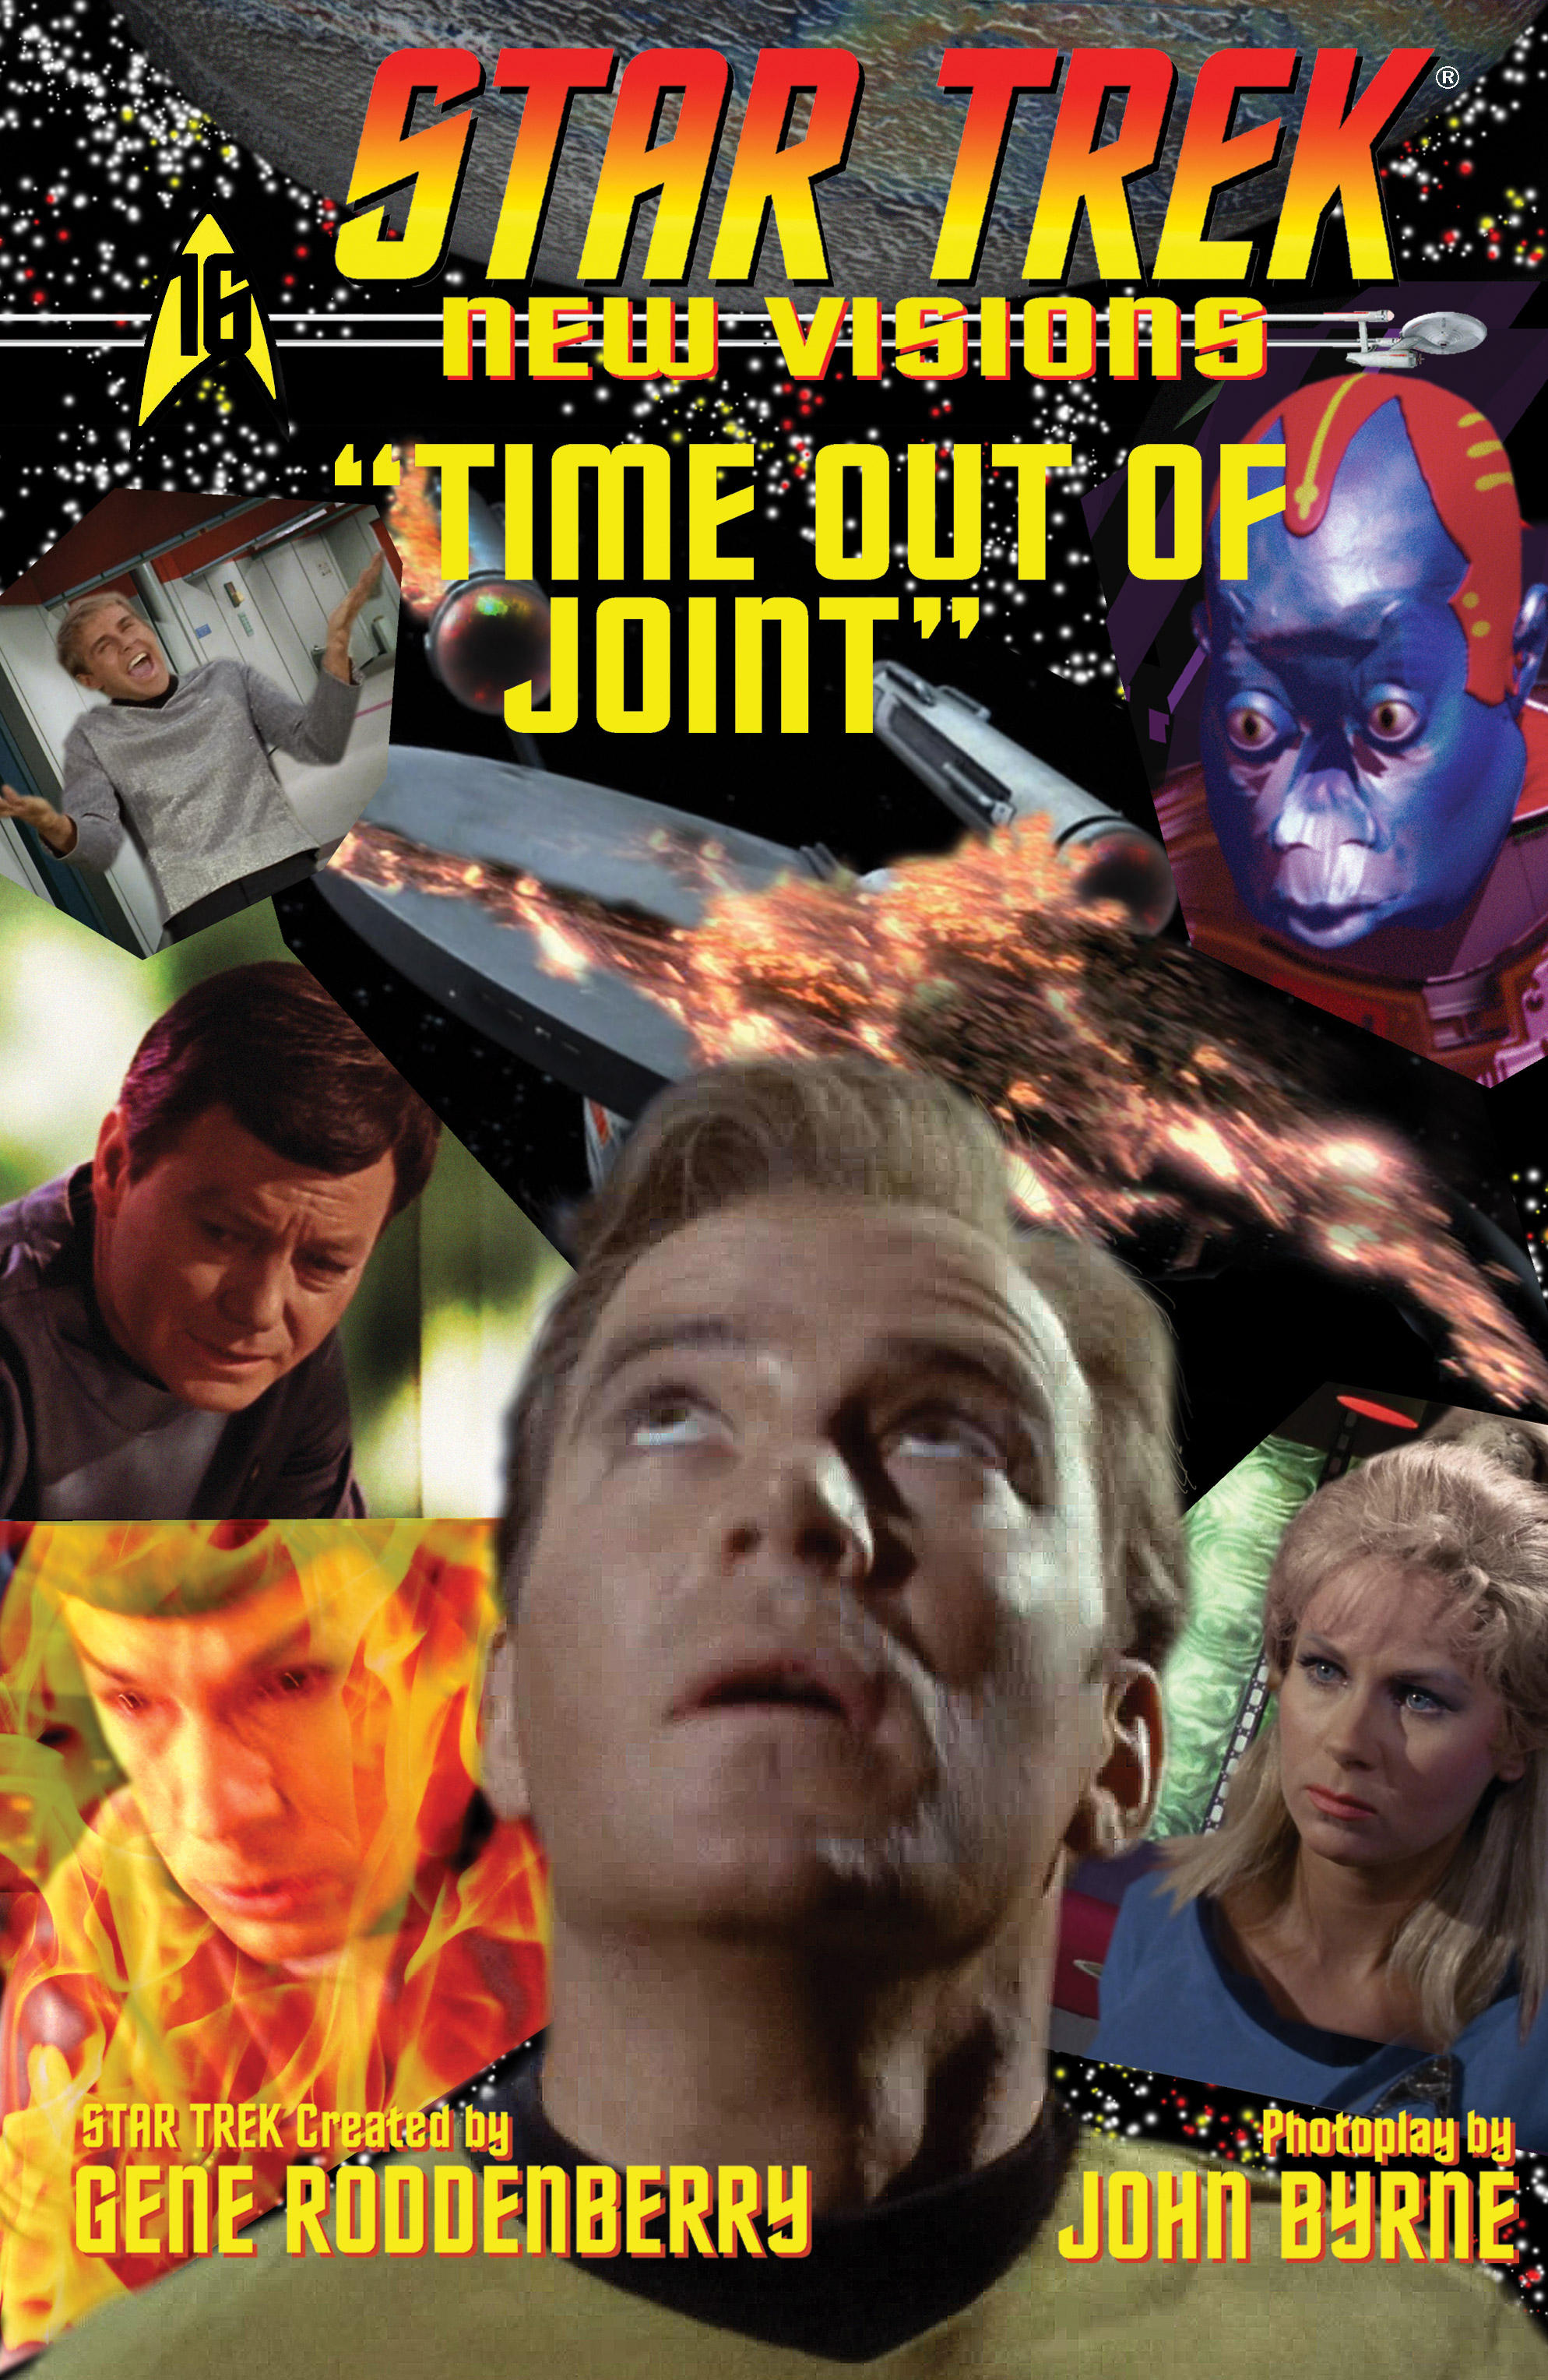 Time out of joint.